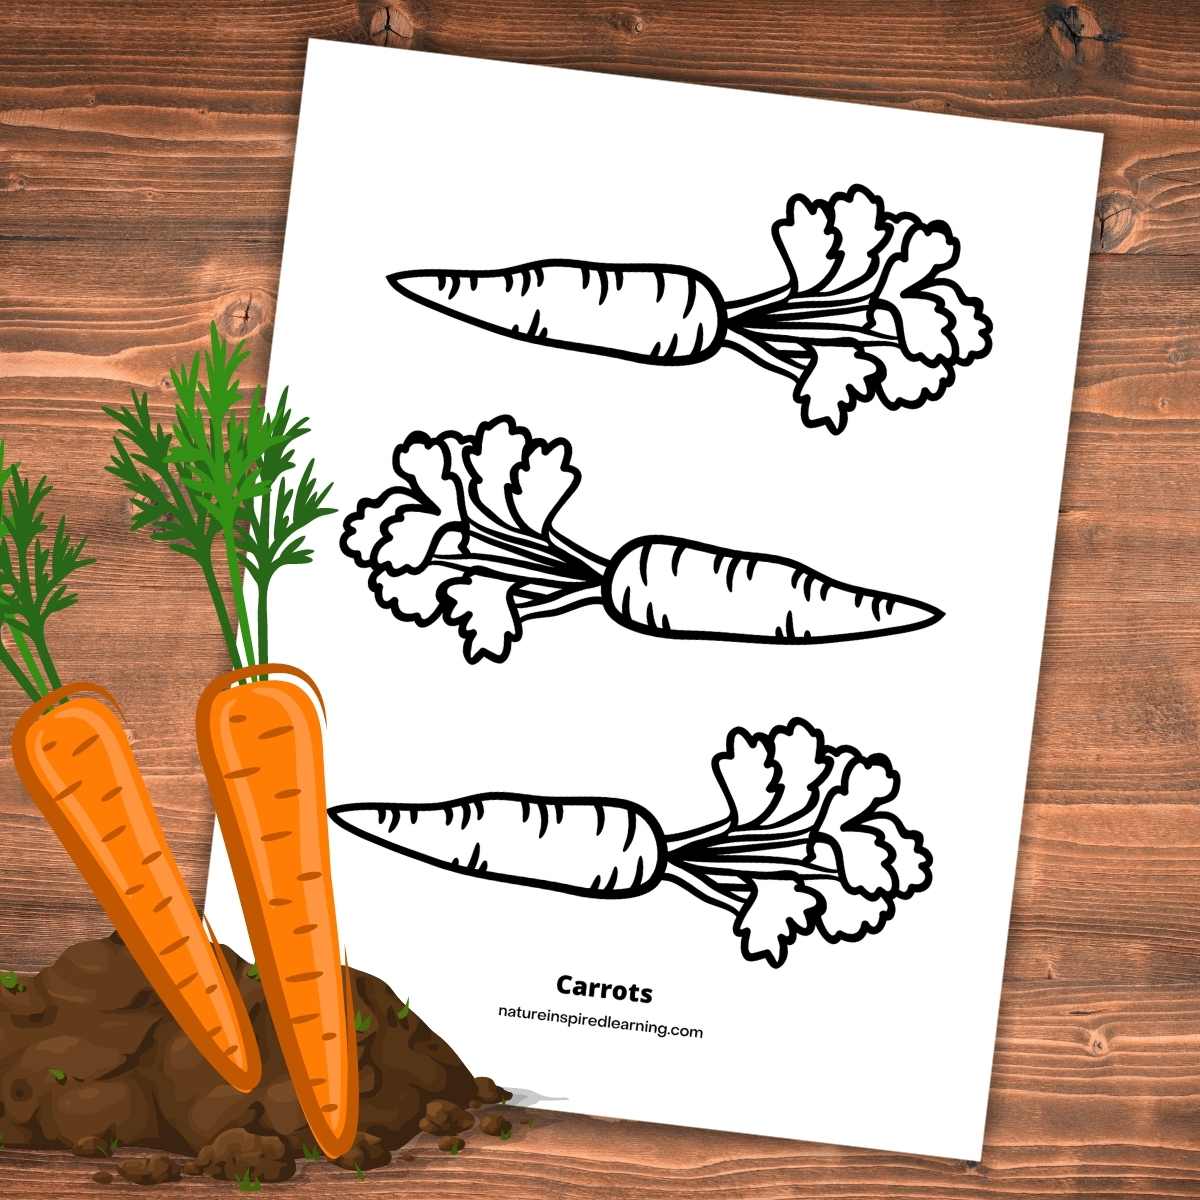 How to Draw a Carrot - FeltMagnet